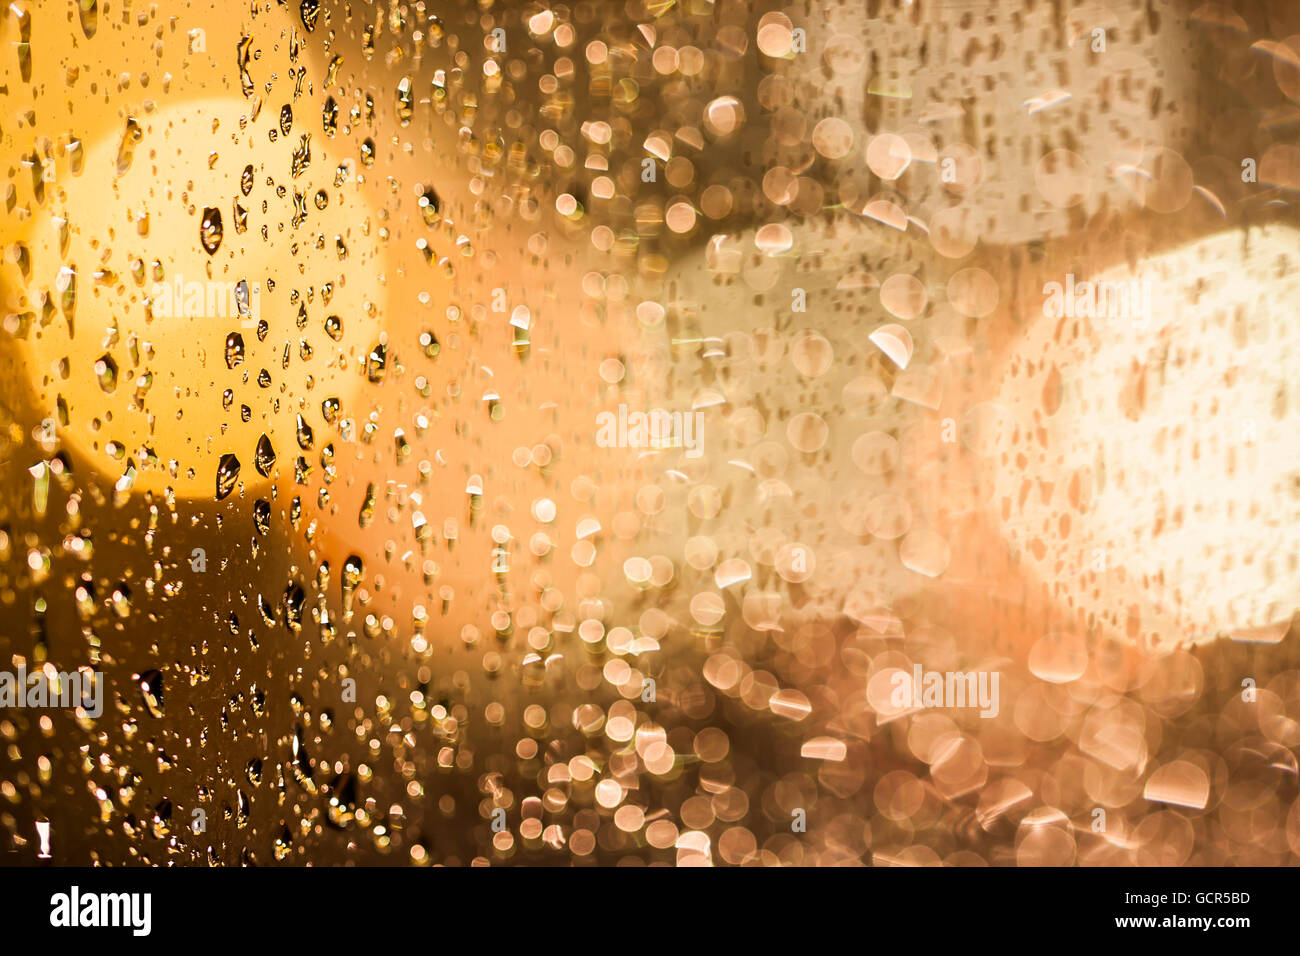 Closeup of a rain or water drops on a window glass Stock Photo